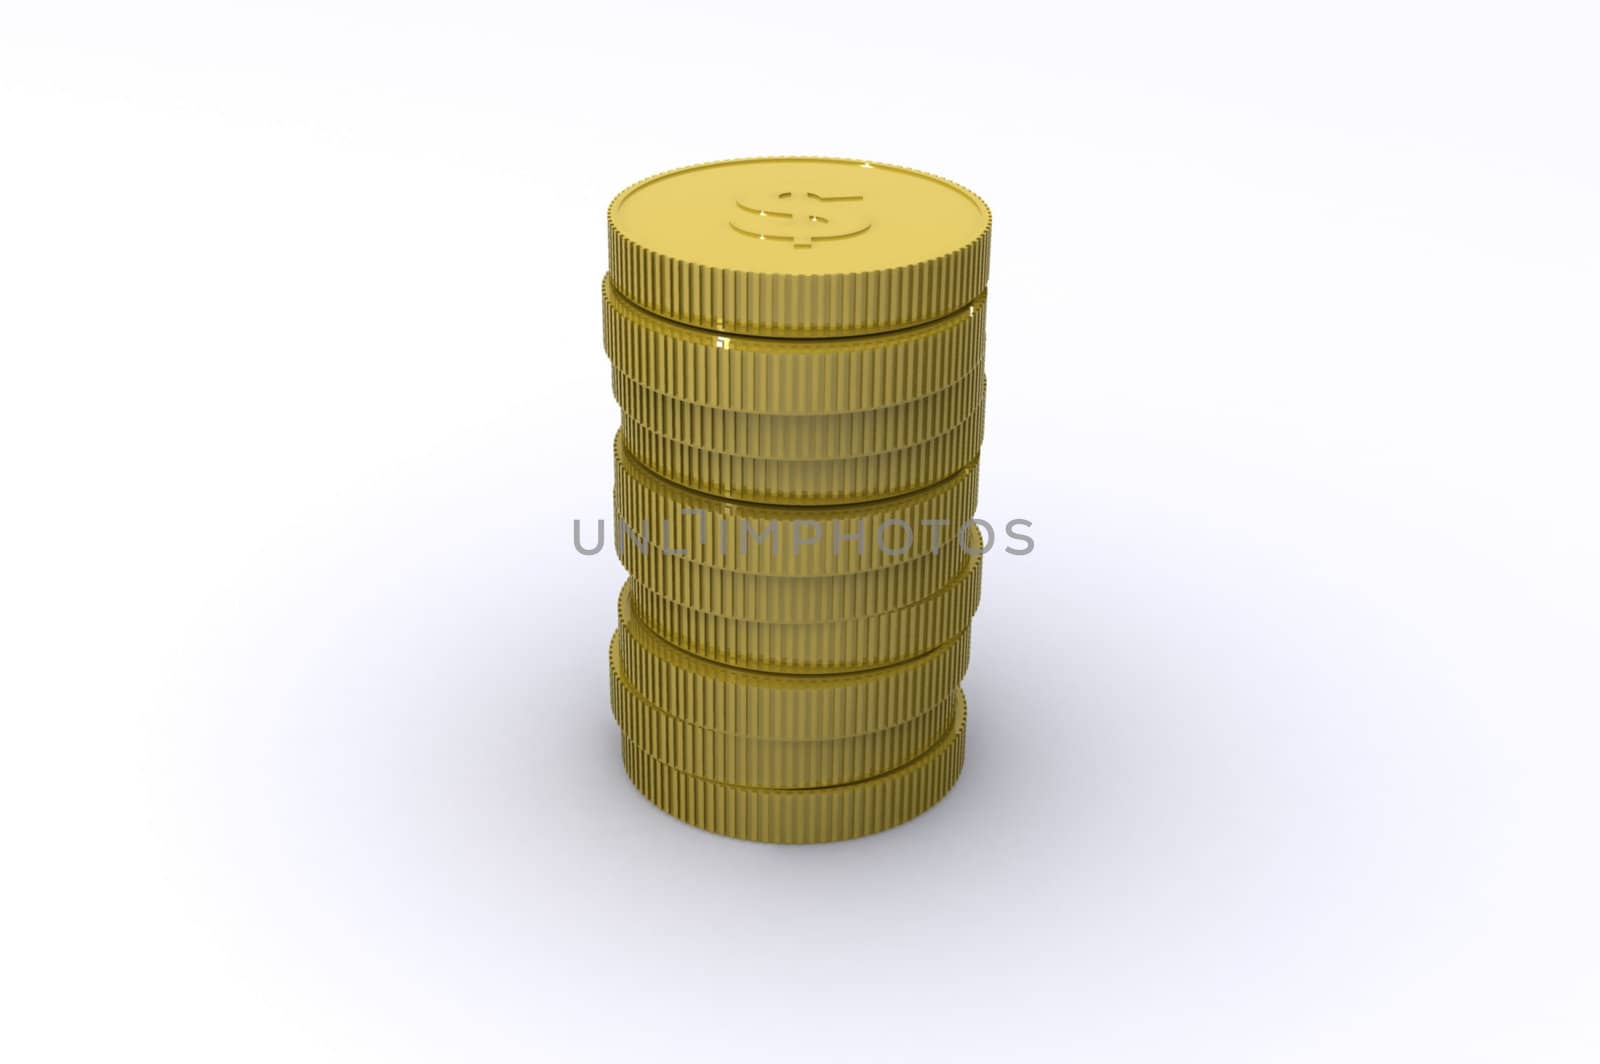 Cents Coin Stack by head-off